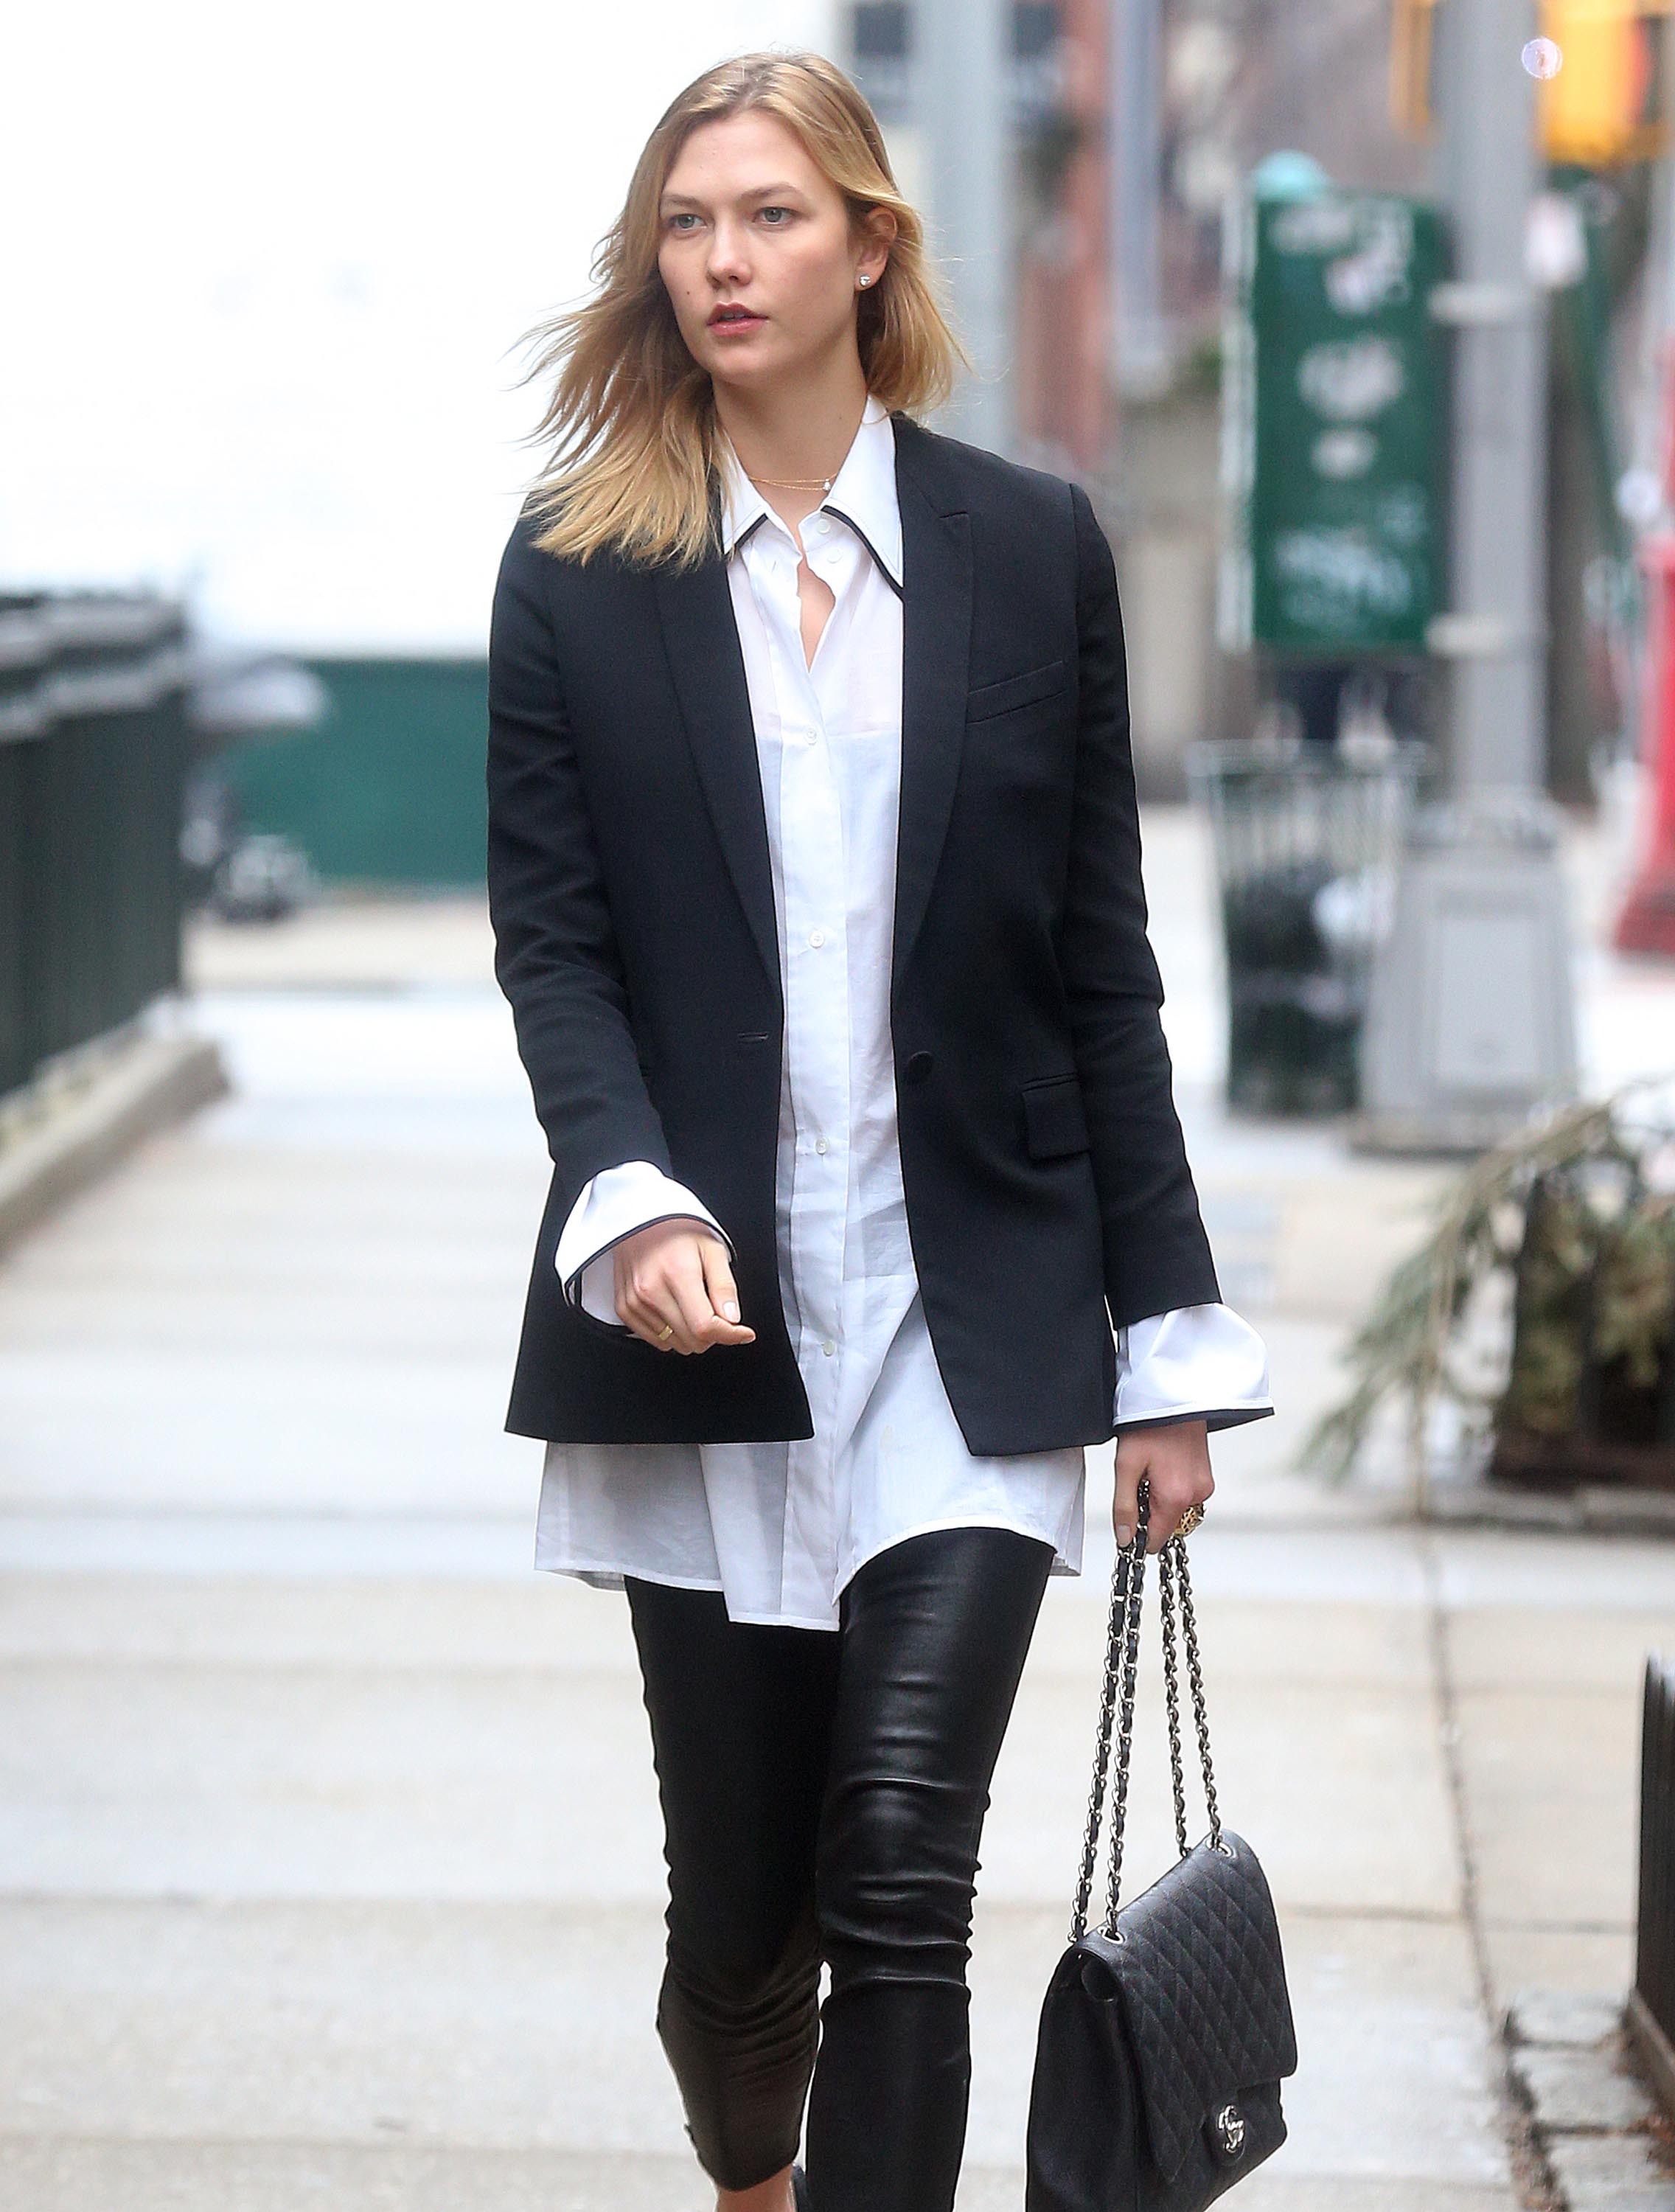 Karlie Kloss seen out and about in NYC